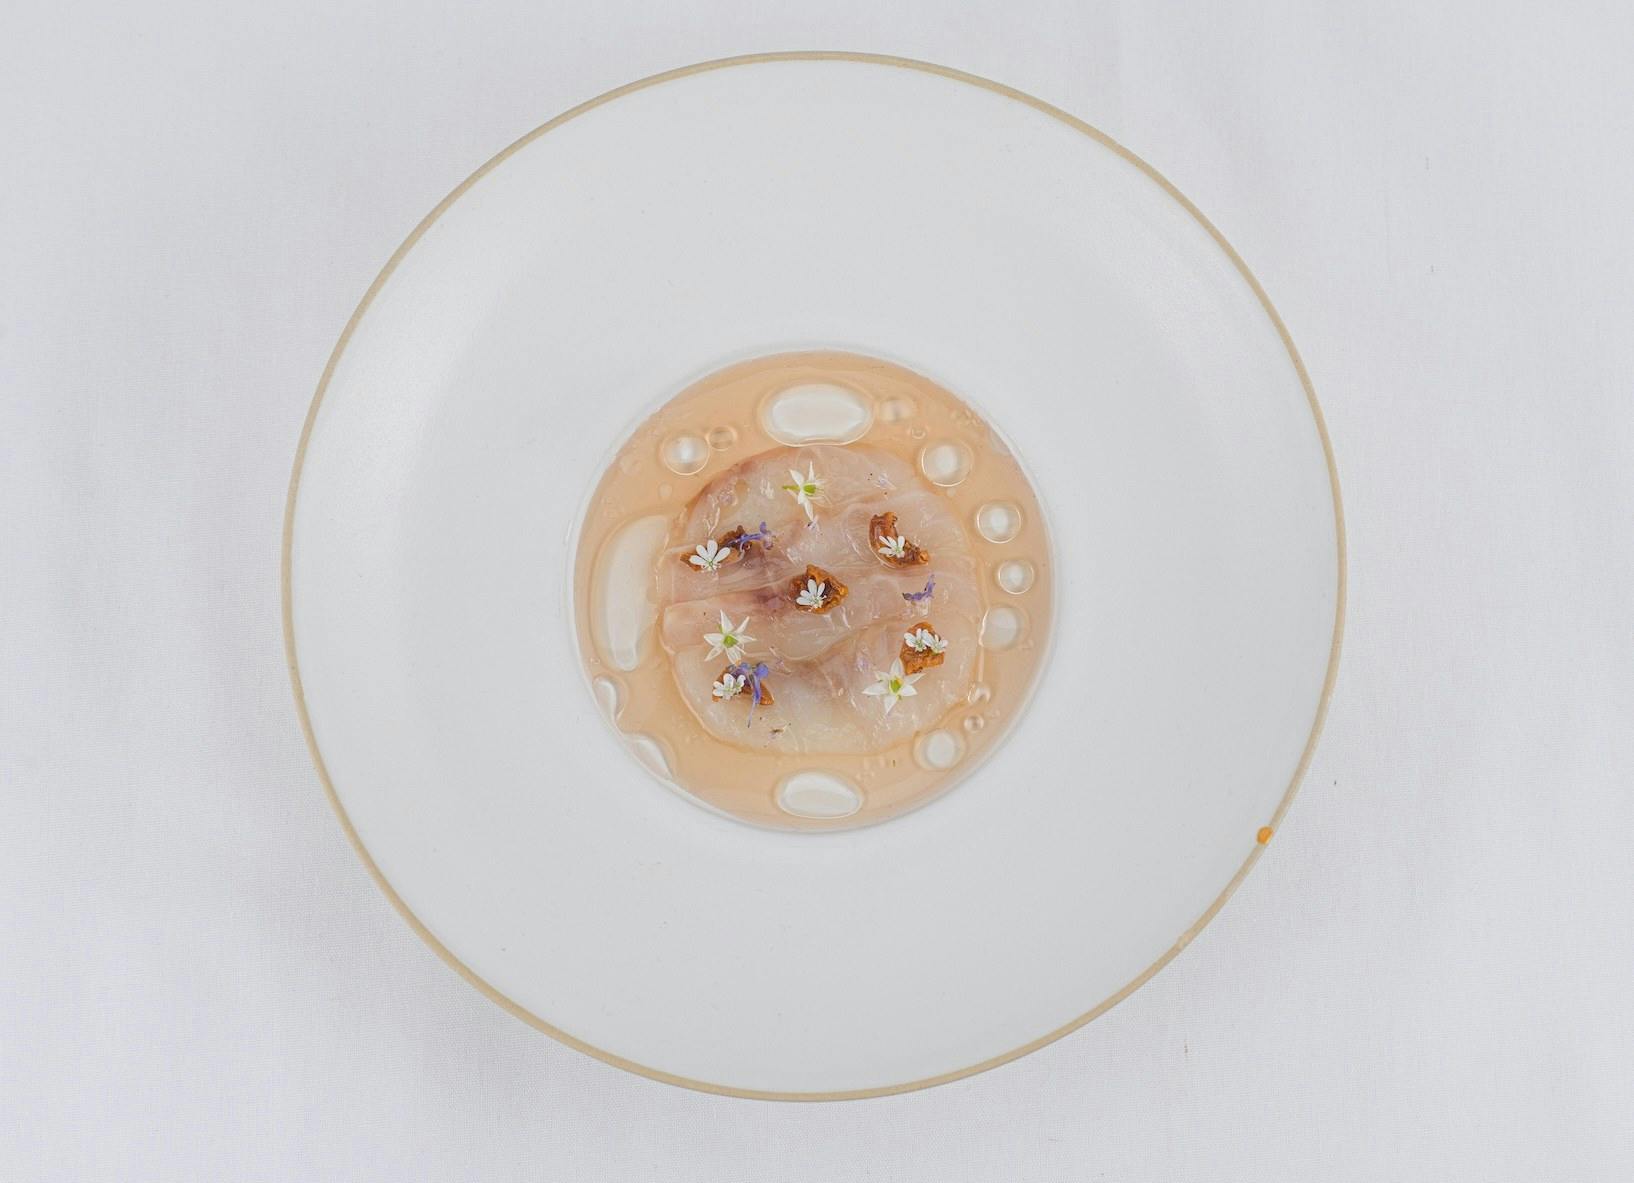 Chef Gustave Migdal's picture